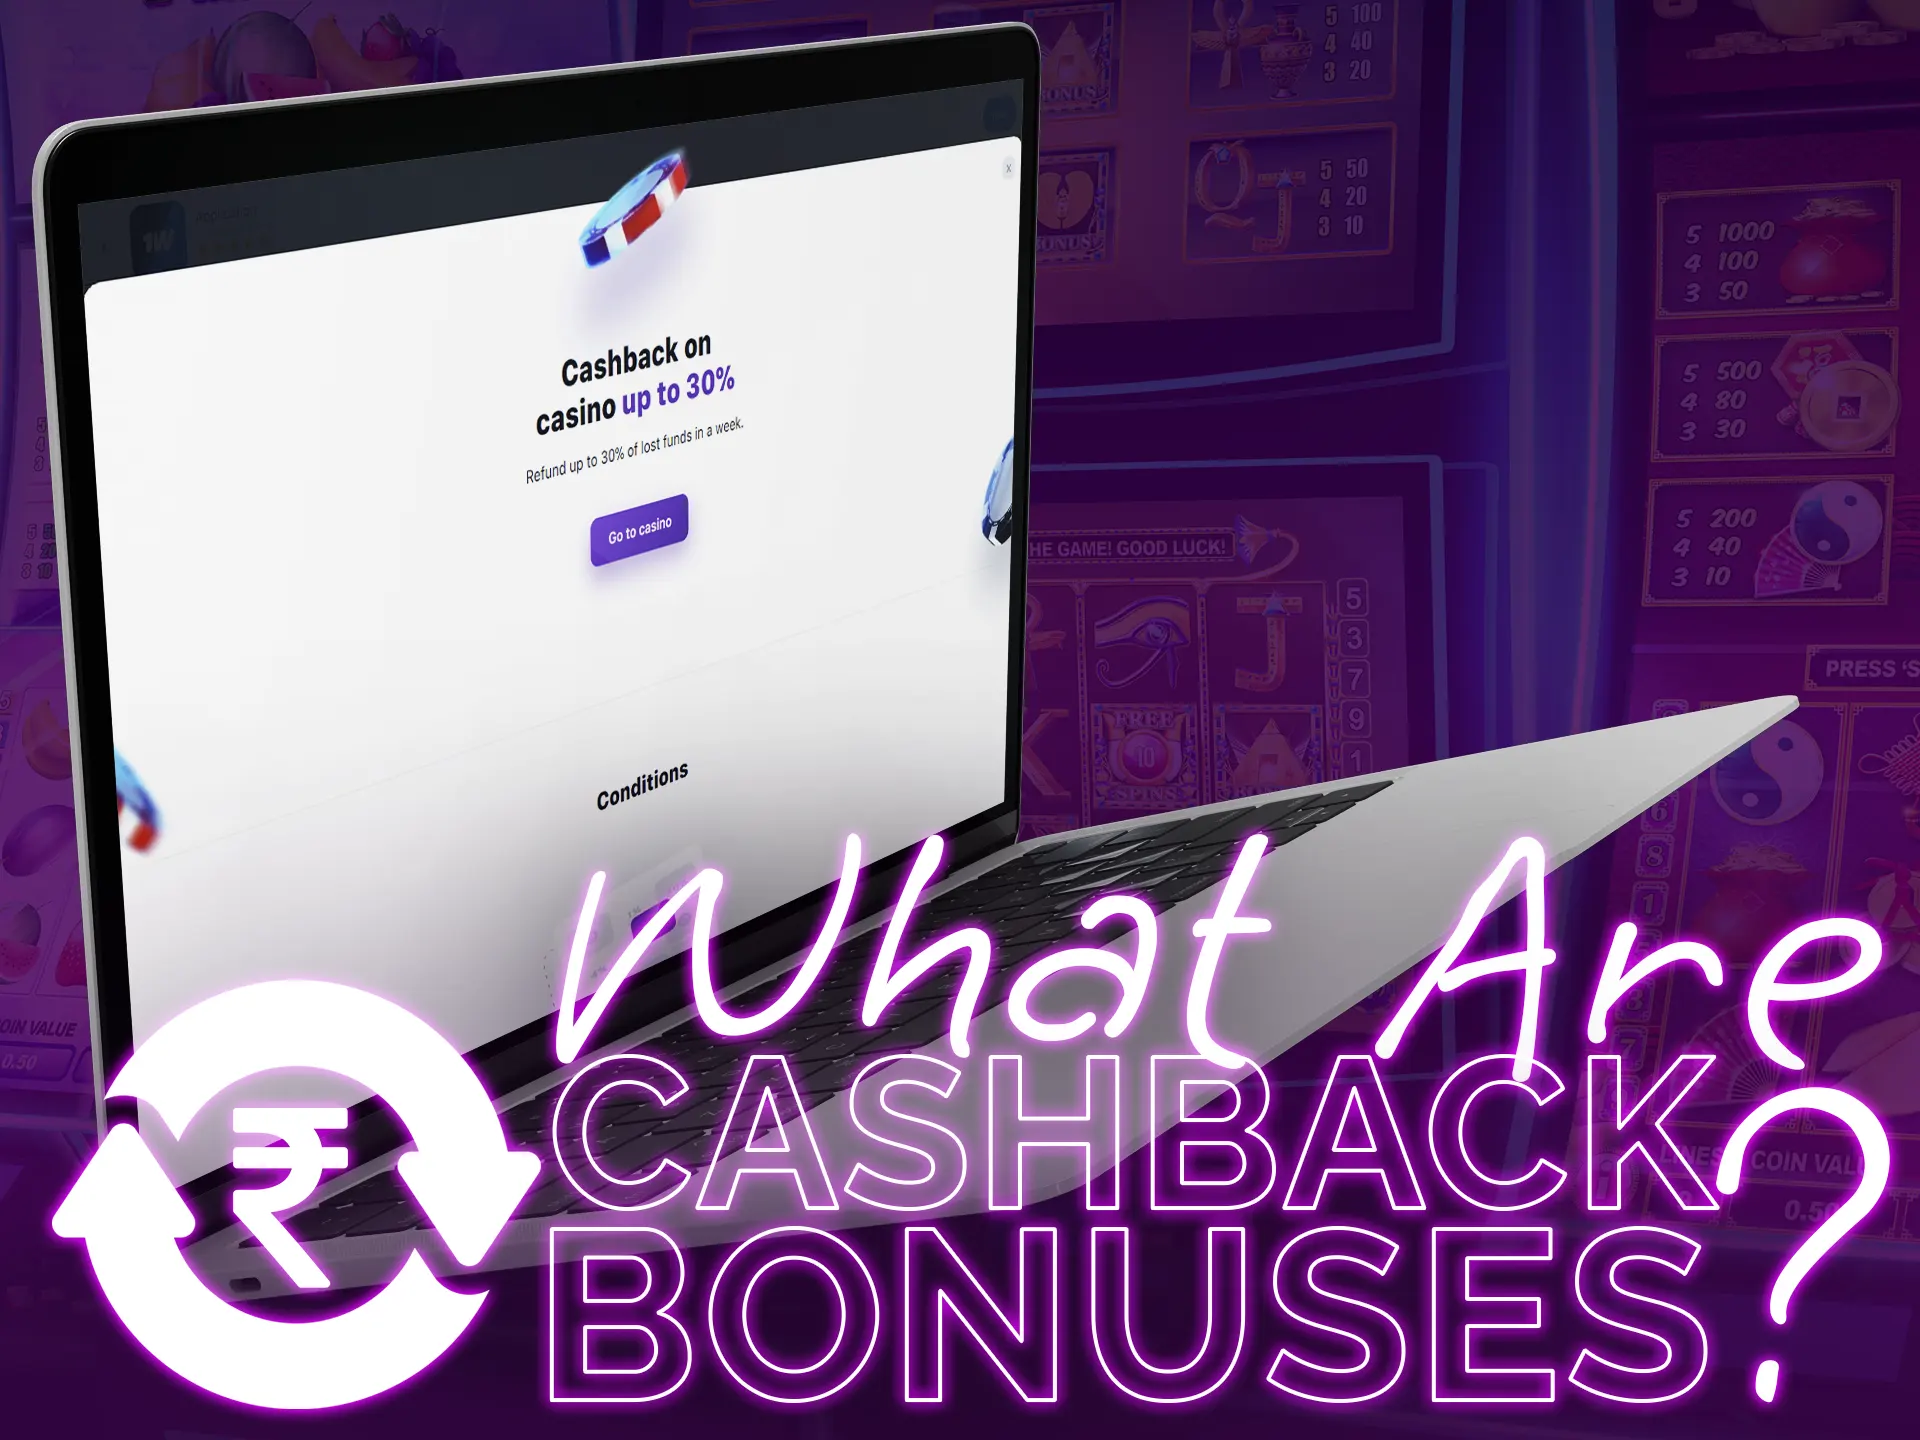 Learn what cashback bonuses are.